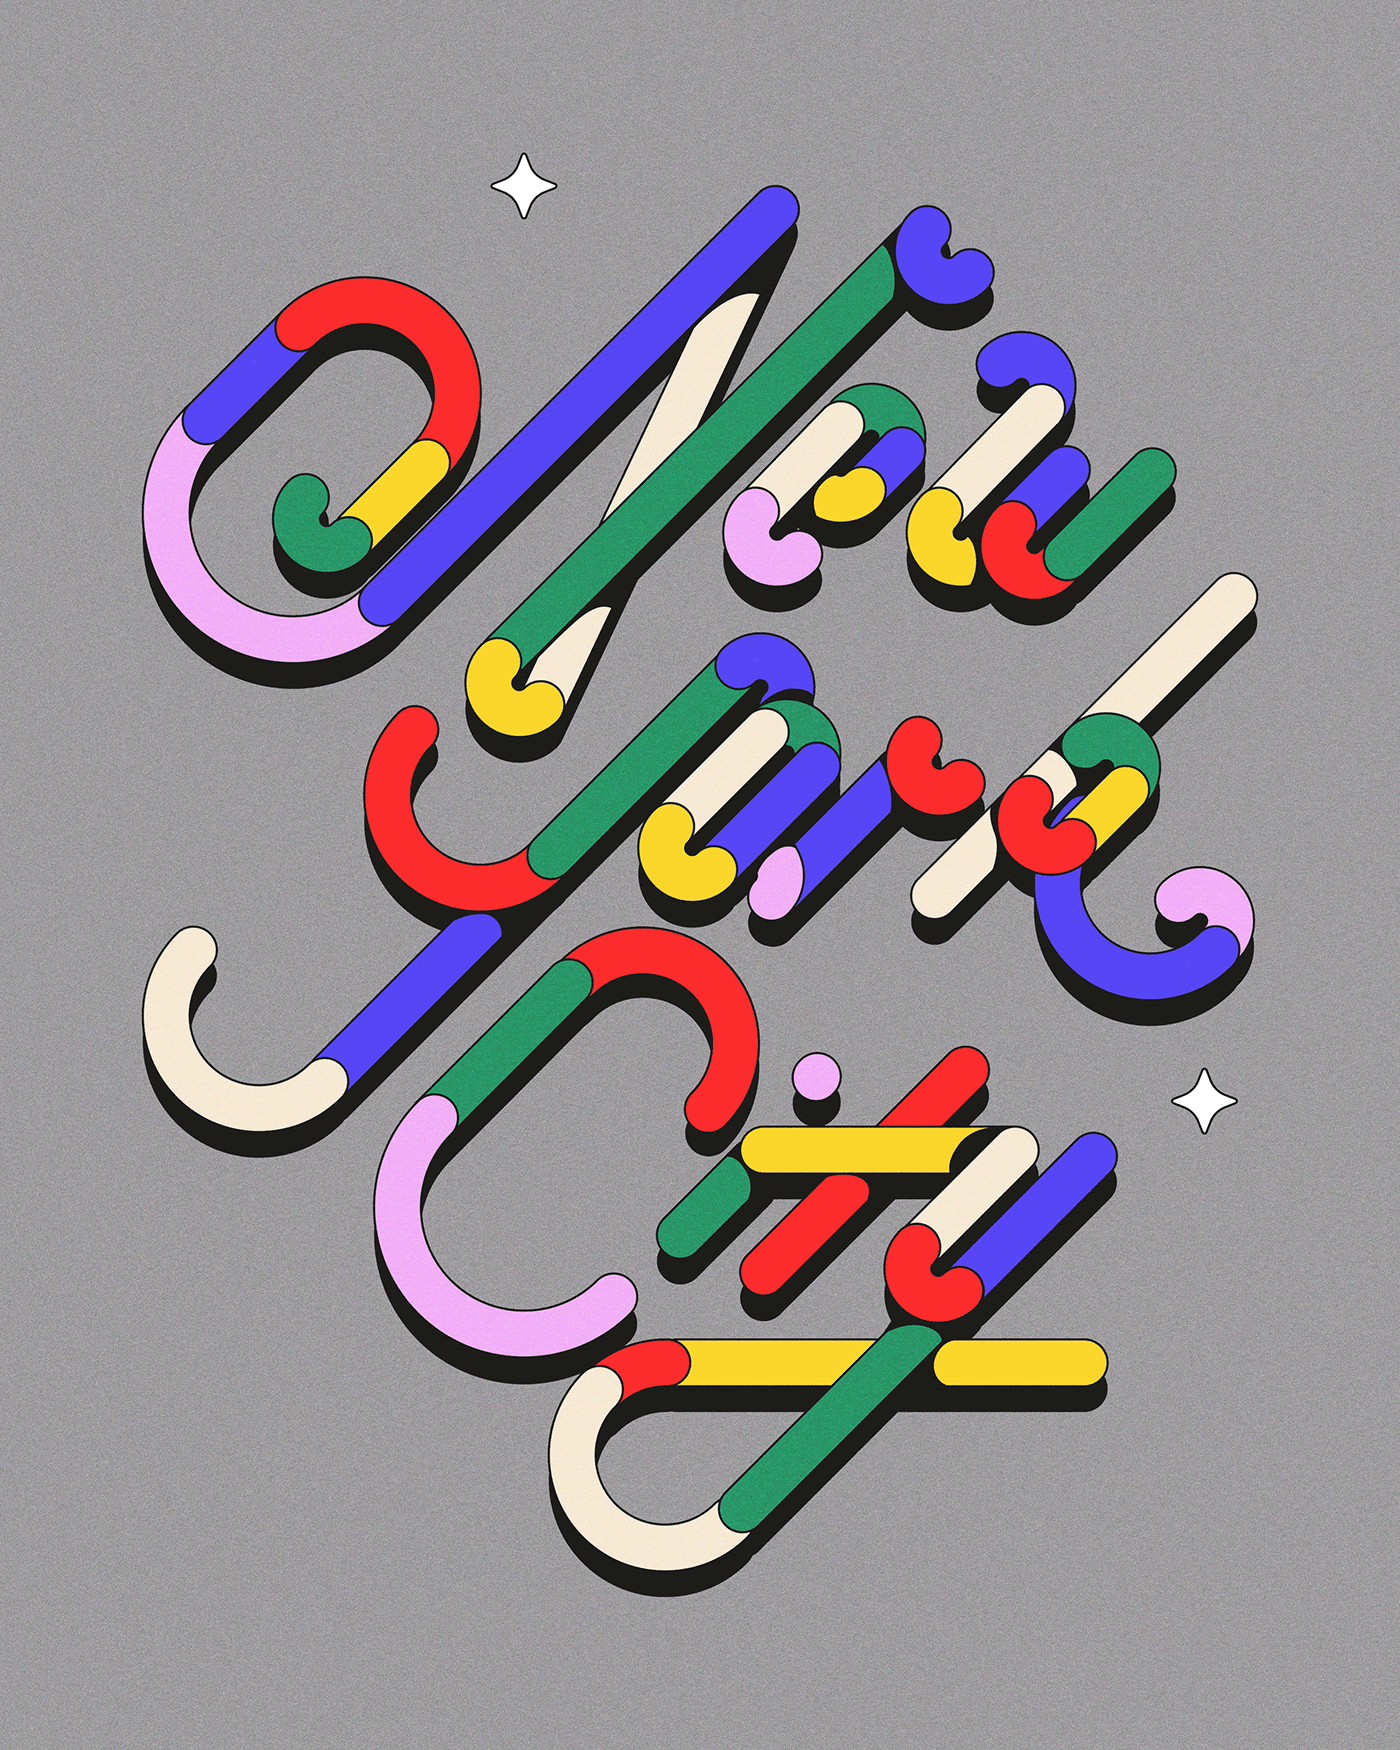 Poster size lettering type exploration and colourful outlines 70's inspired illustration type.